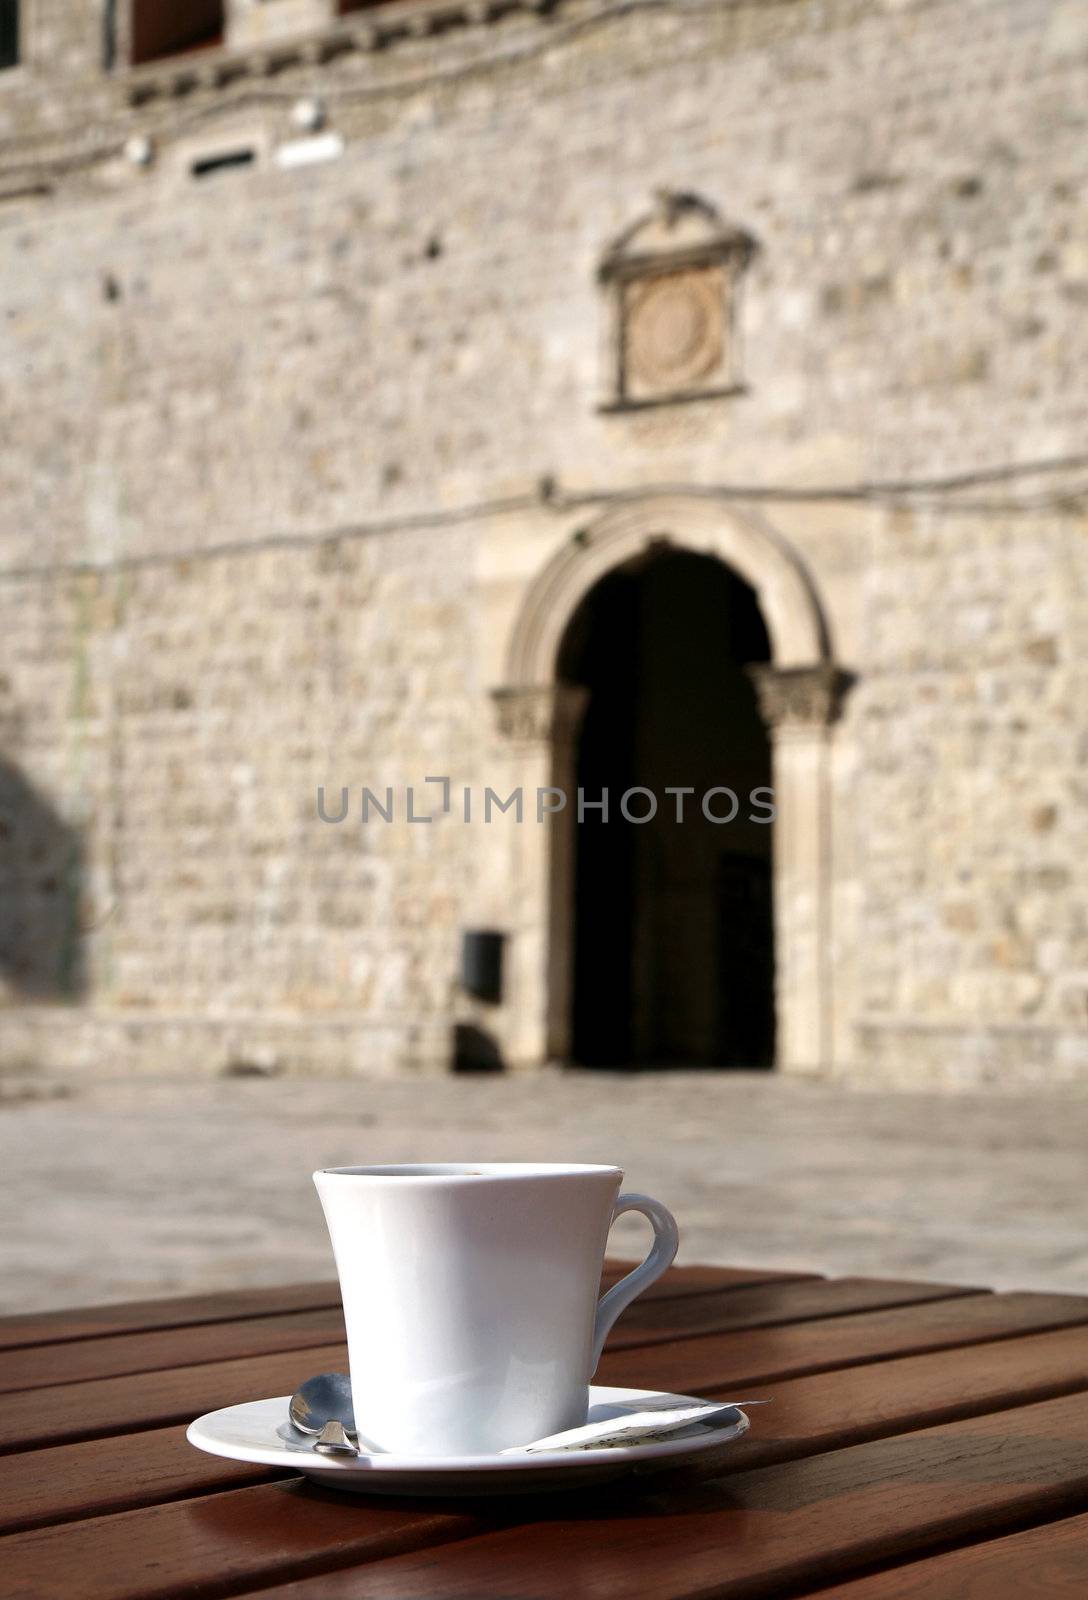 One, white, cup of coffee on table in old harbor in Dubrovnik – Stari Grad. In background-  the gate and curtain walls of the Old Town.